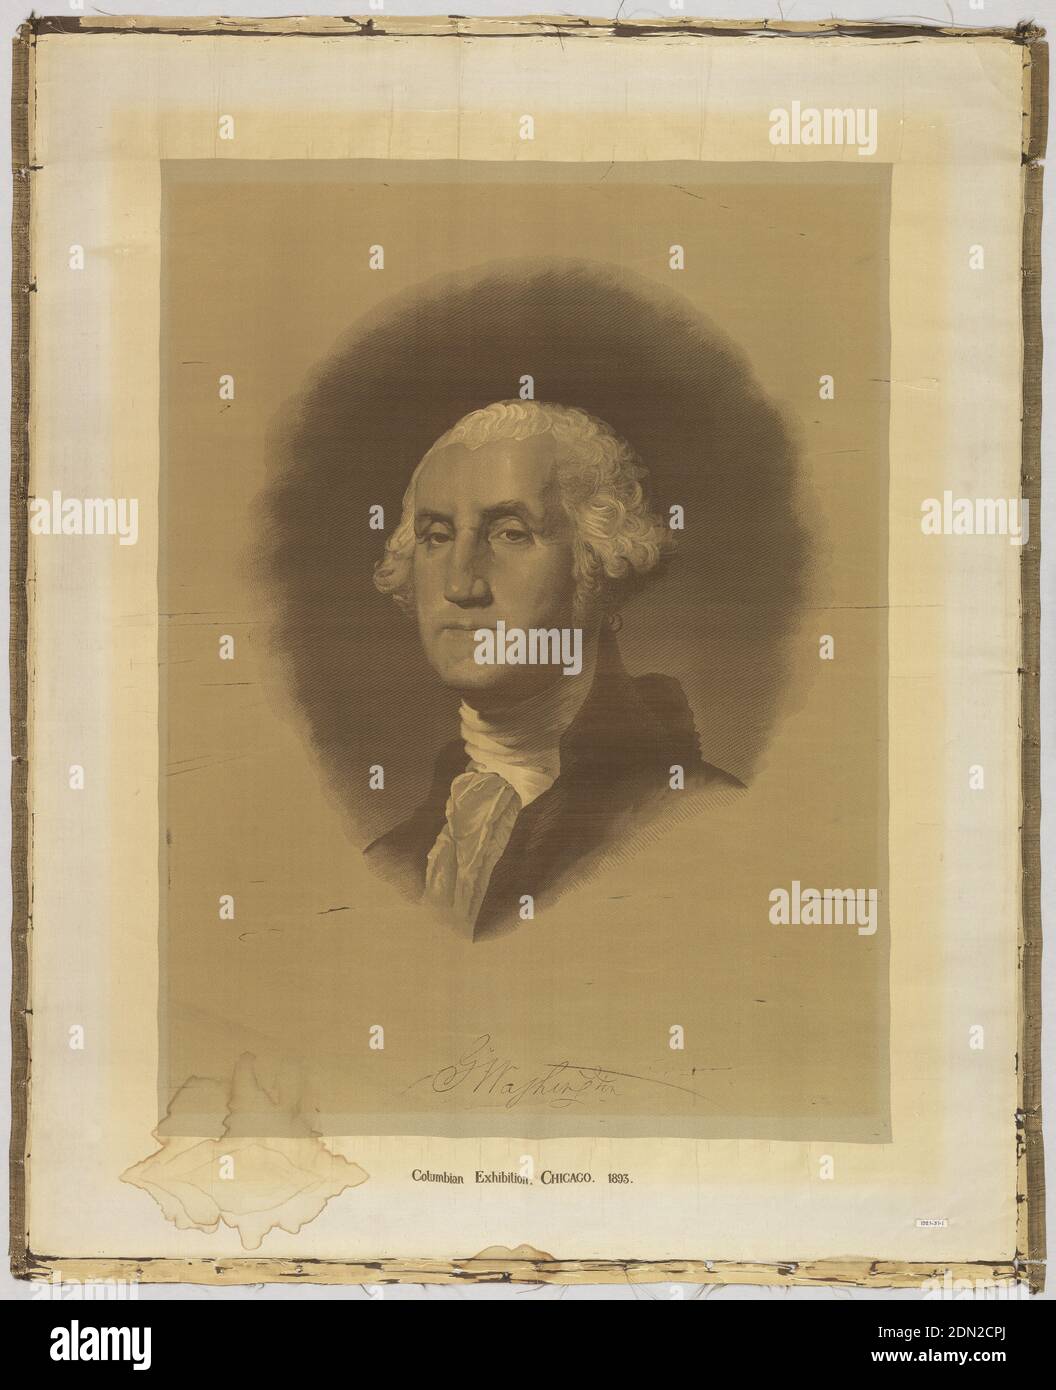 Woven portrait, Medium: silk Technique: jacquard woven, Portrait of George Washington after a painting by Gilbert Stuart. Woven in black, gray and beige on a white ground. Facsimile of a signature 'G Washington' woven at the bottom., Chicago, USA, 1893, woven textiles, Woven portrait Stock Photo